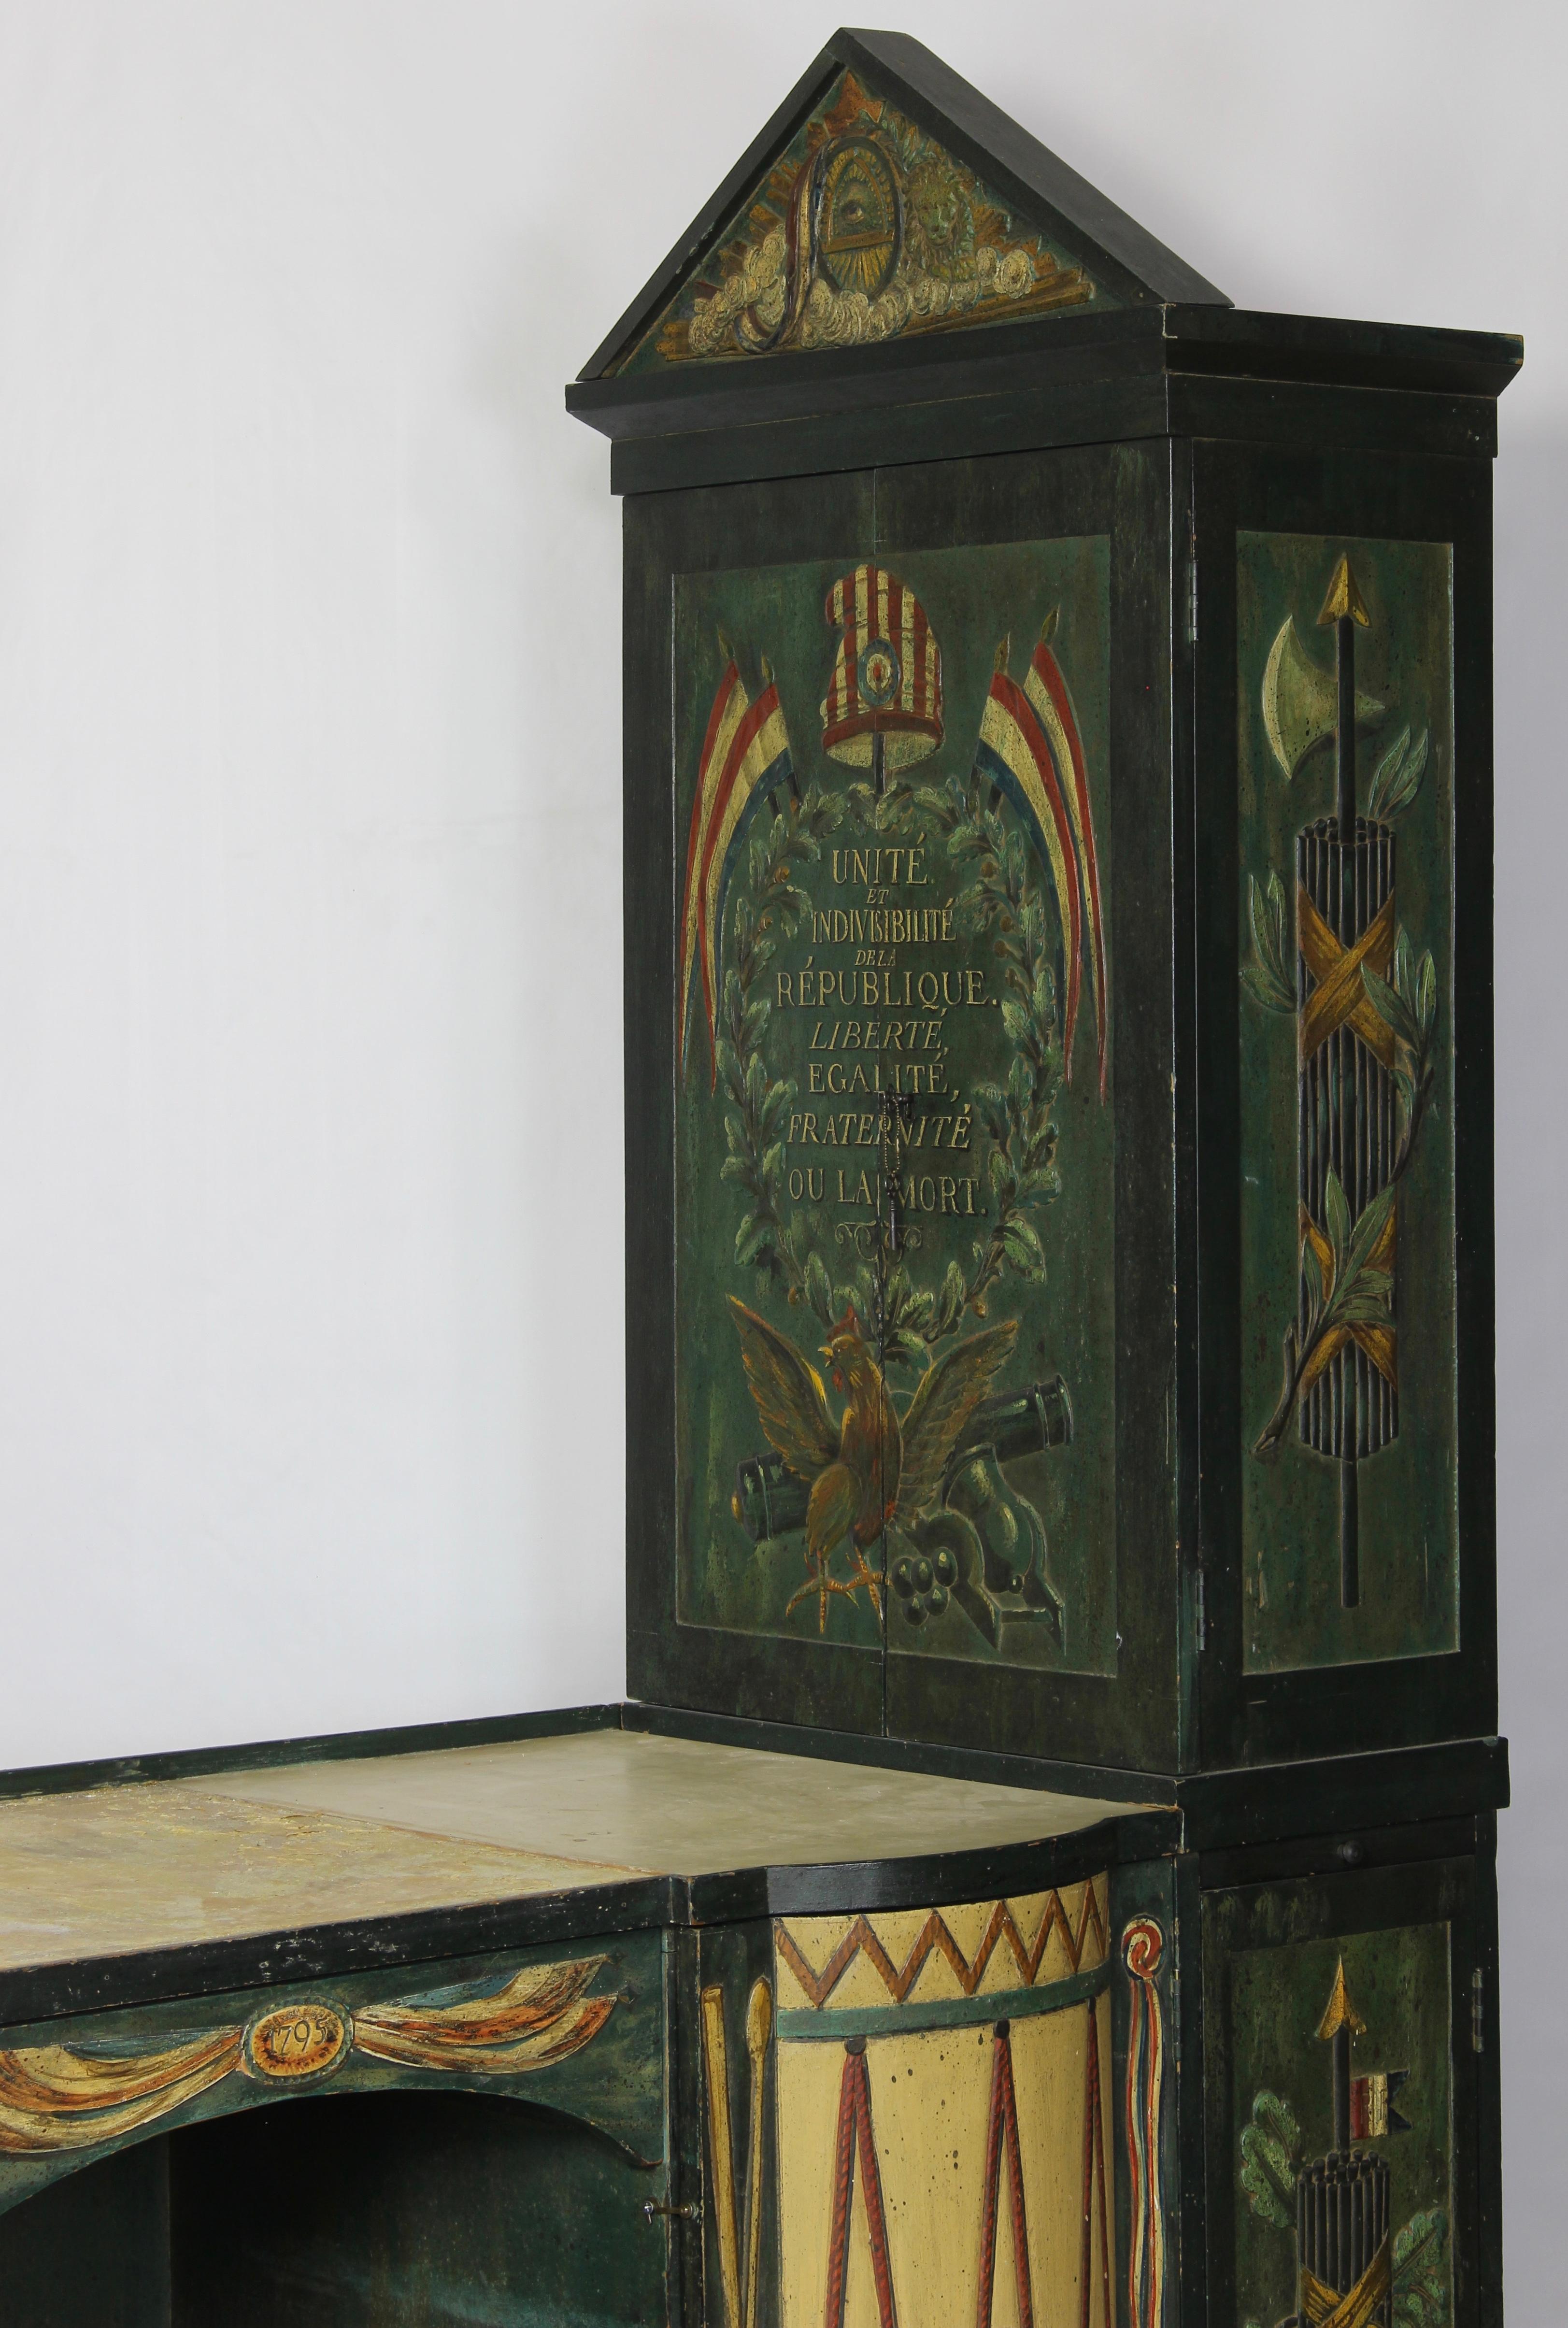 A charming and unusual early 20th century heavily carved and paint decorated desk commemorating the signing of the French constitution in 1795 complete with all the symbols of the French republic. The desk doors concealing shelves and drawers are